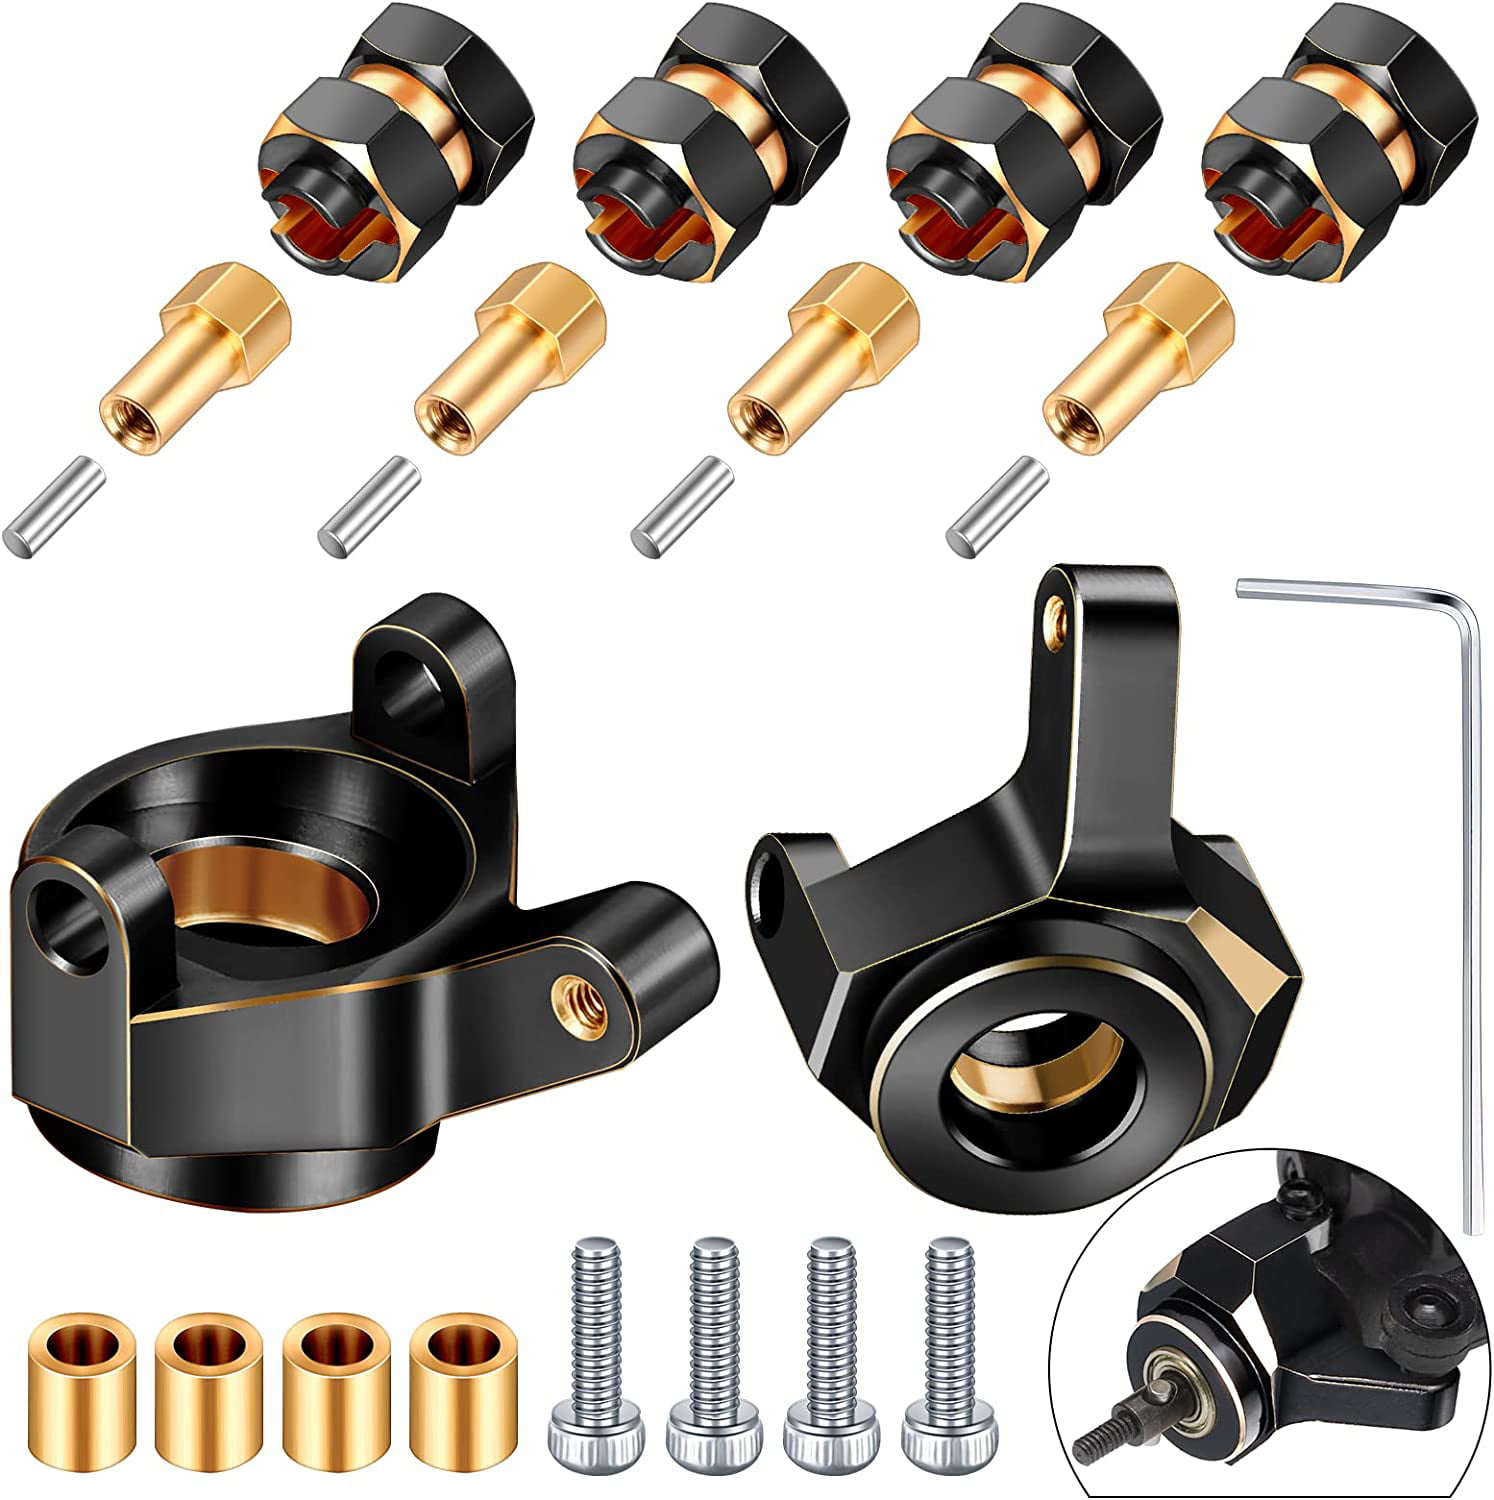 Black-Golden 4 Pieces Brass Extended 7mm Wheel Hex Hub Extension 8mm Thick and 2 Pieces Brass Steering Knuckle Compatible with AXIAL SCX24 AXI90081 Upgrades Parts 1/24 RC Crawler Car Accessories 